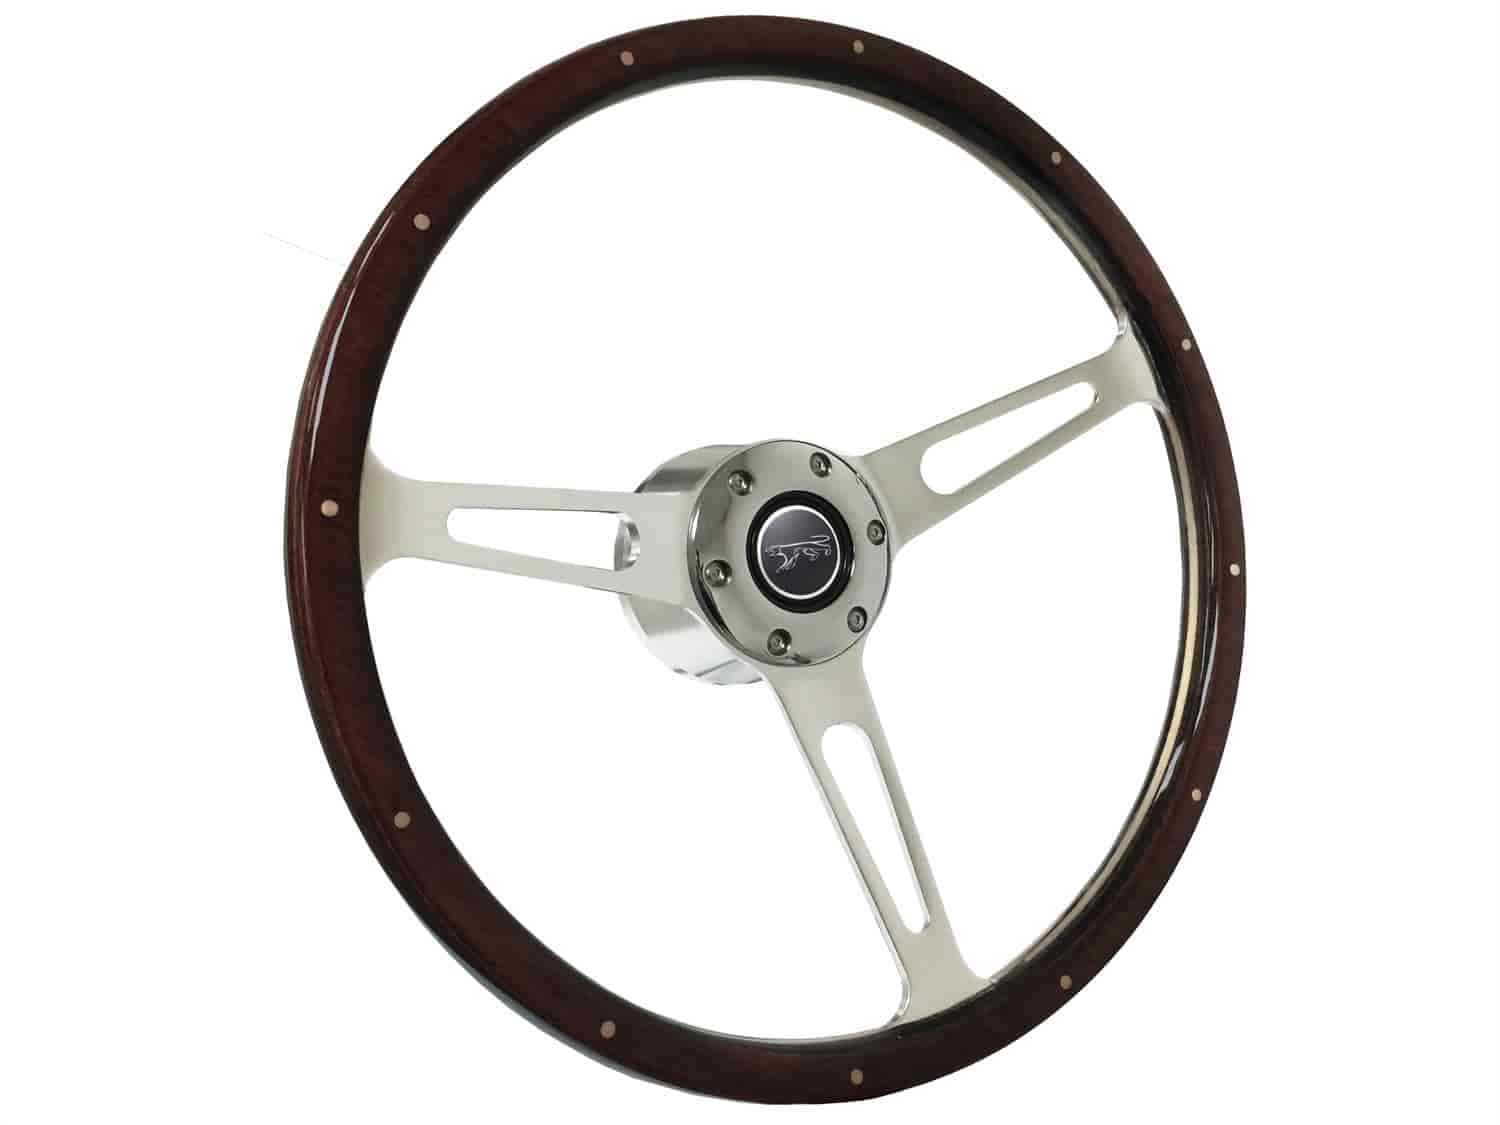 S6 Classic Steering Wheel Kit 1968-91 Ford/Mercury, 15 in. Diameter, Deluxe Espresso Wood Grip, w/ 6-Bolt Adapter & Horn Button